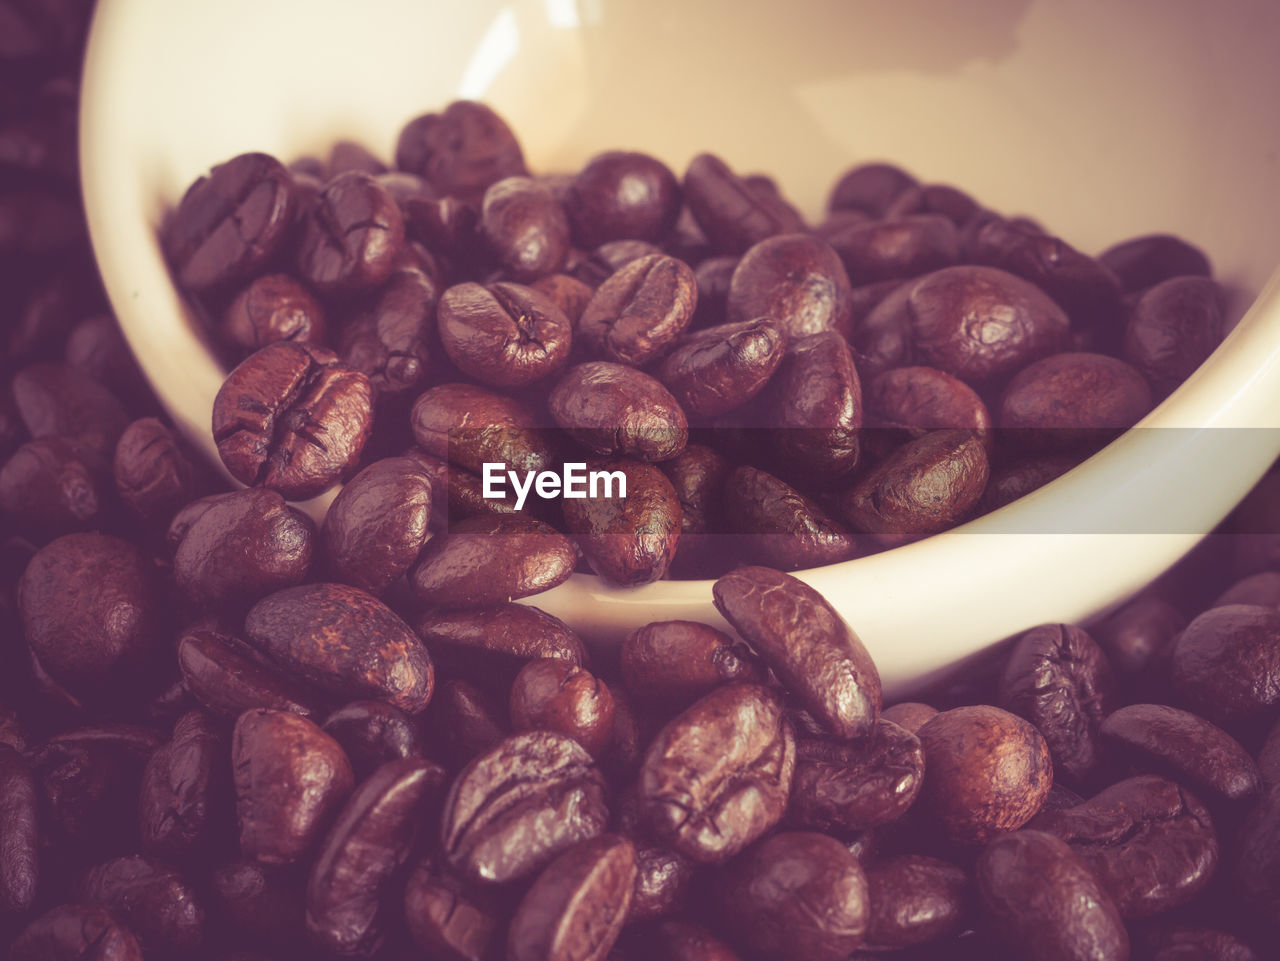 CLOSE-UP OF COFFEE BEANS IN THE BOWL